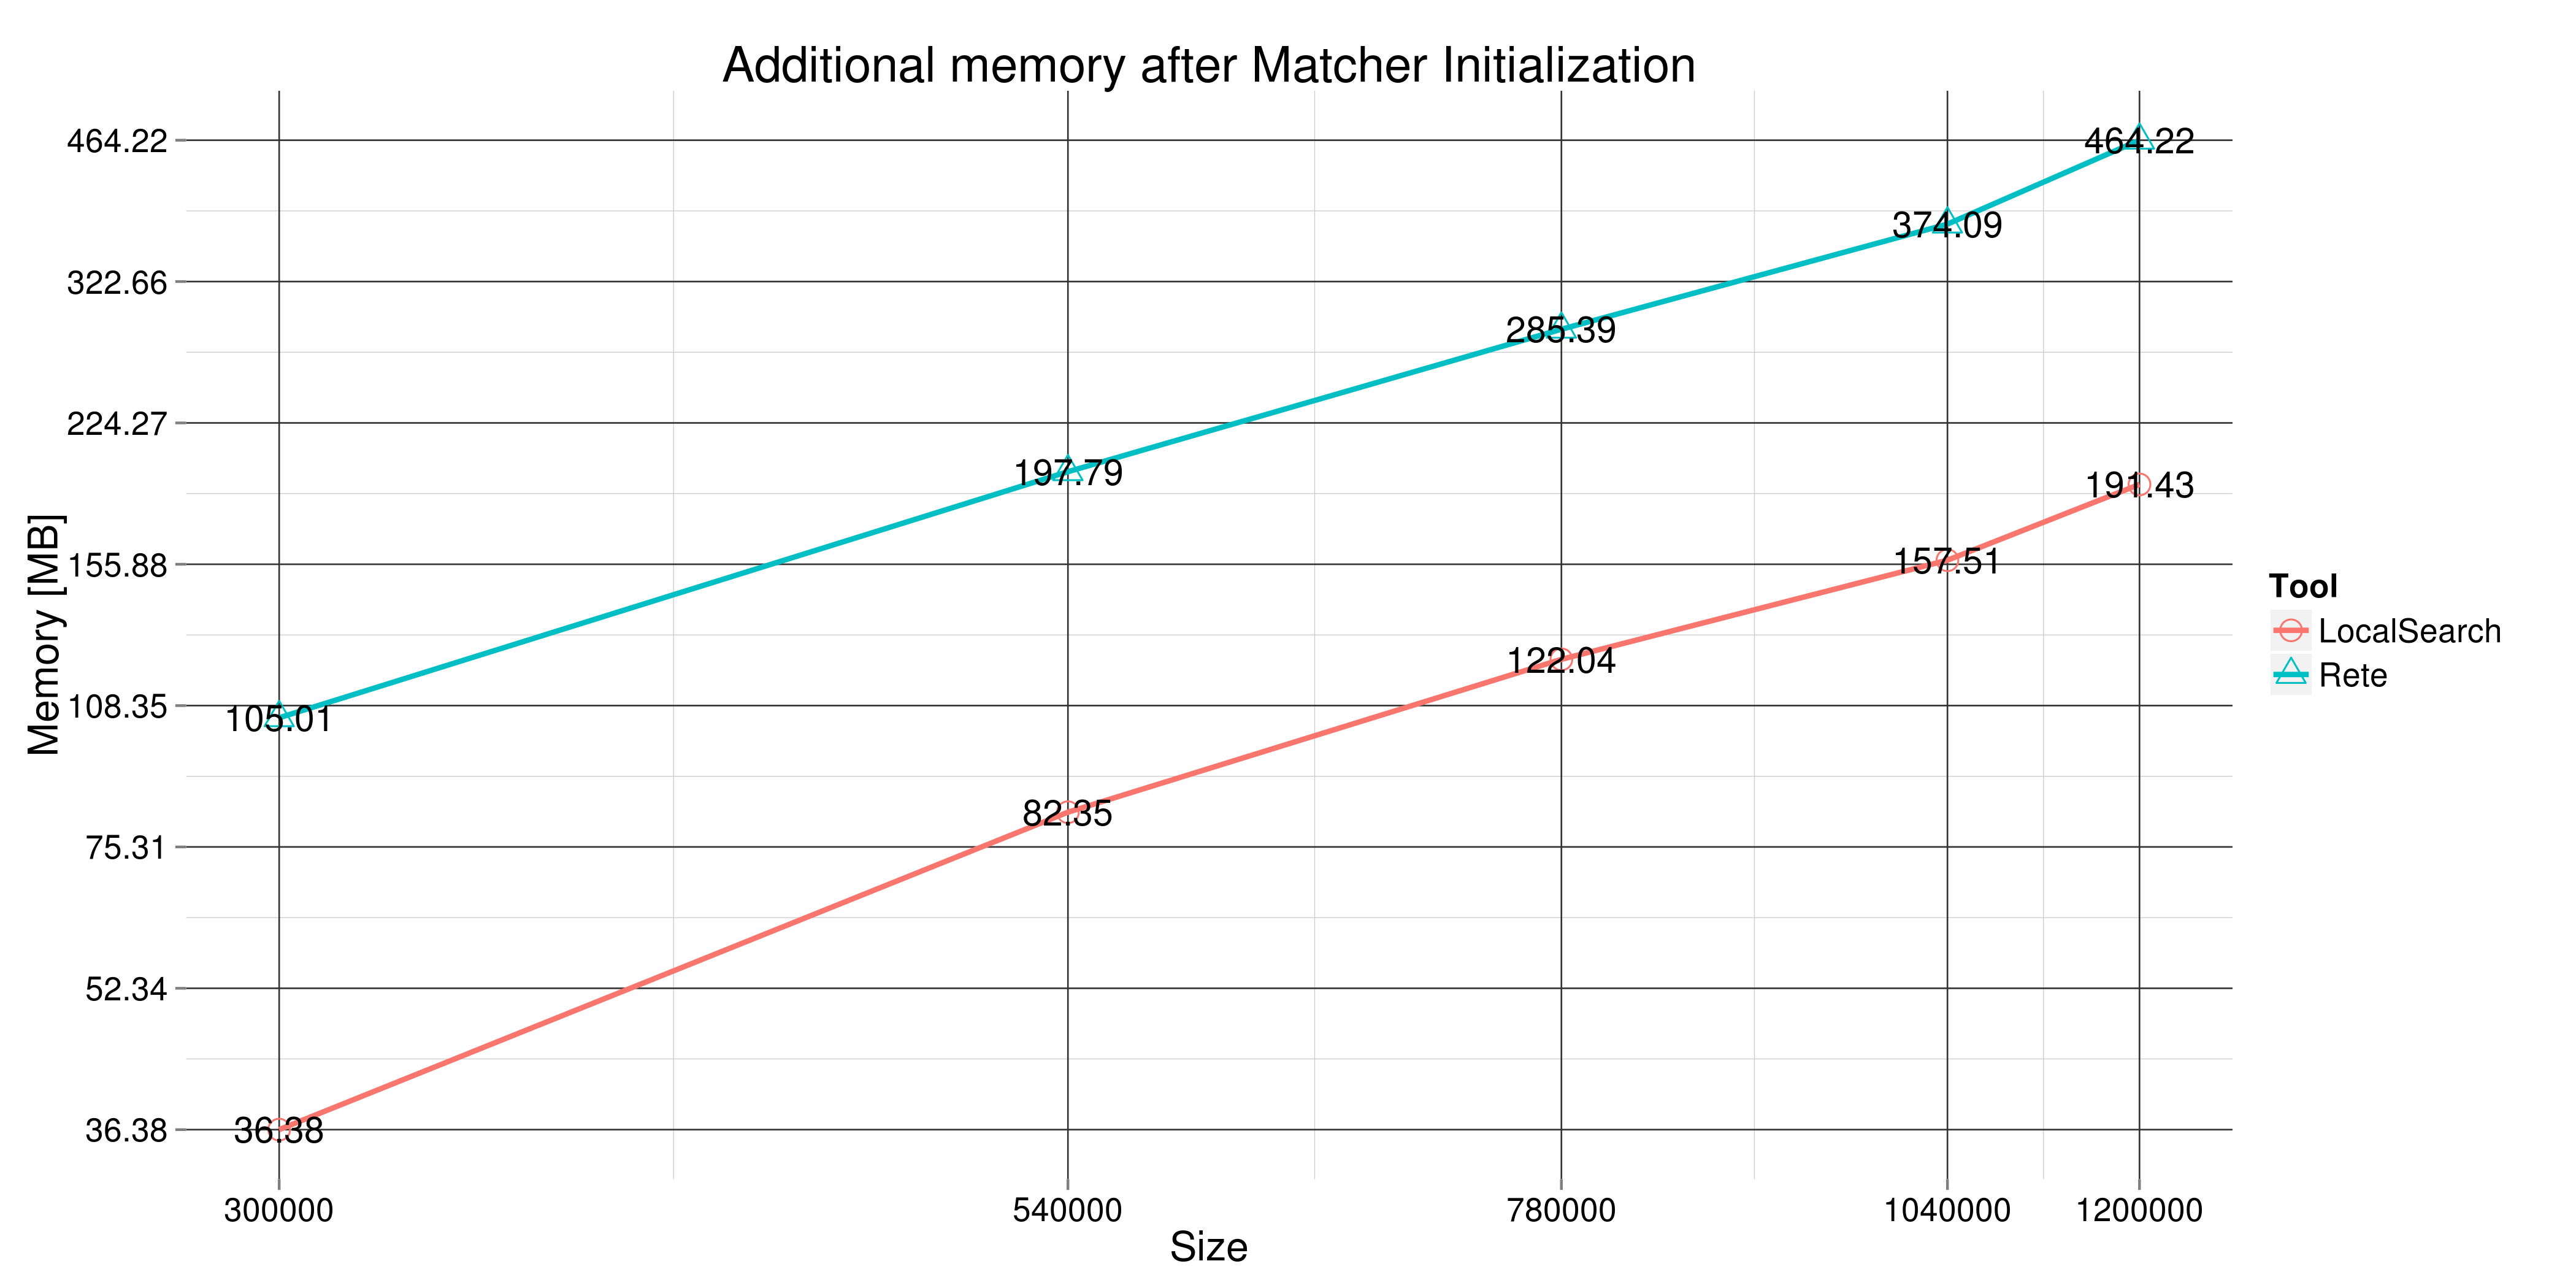 Memory overhead after initialization